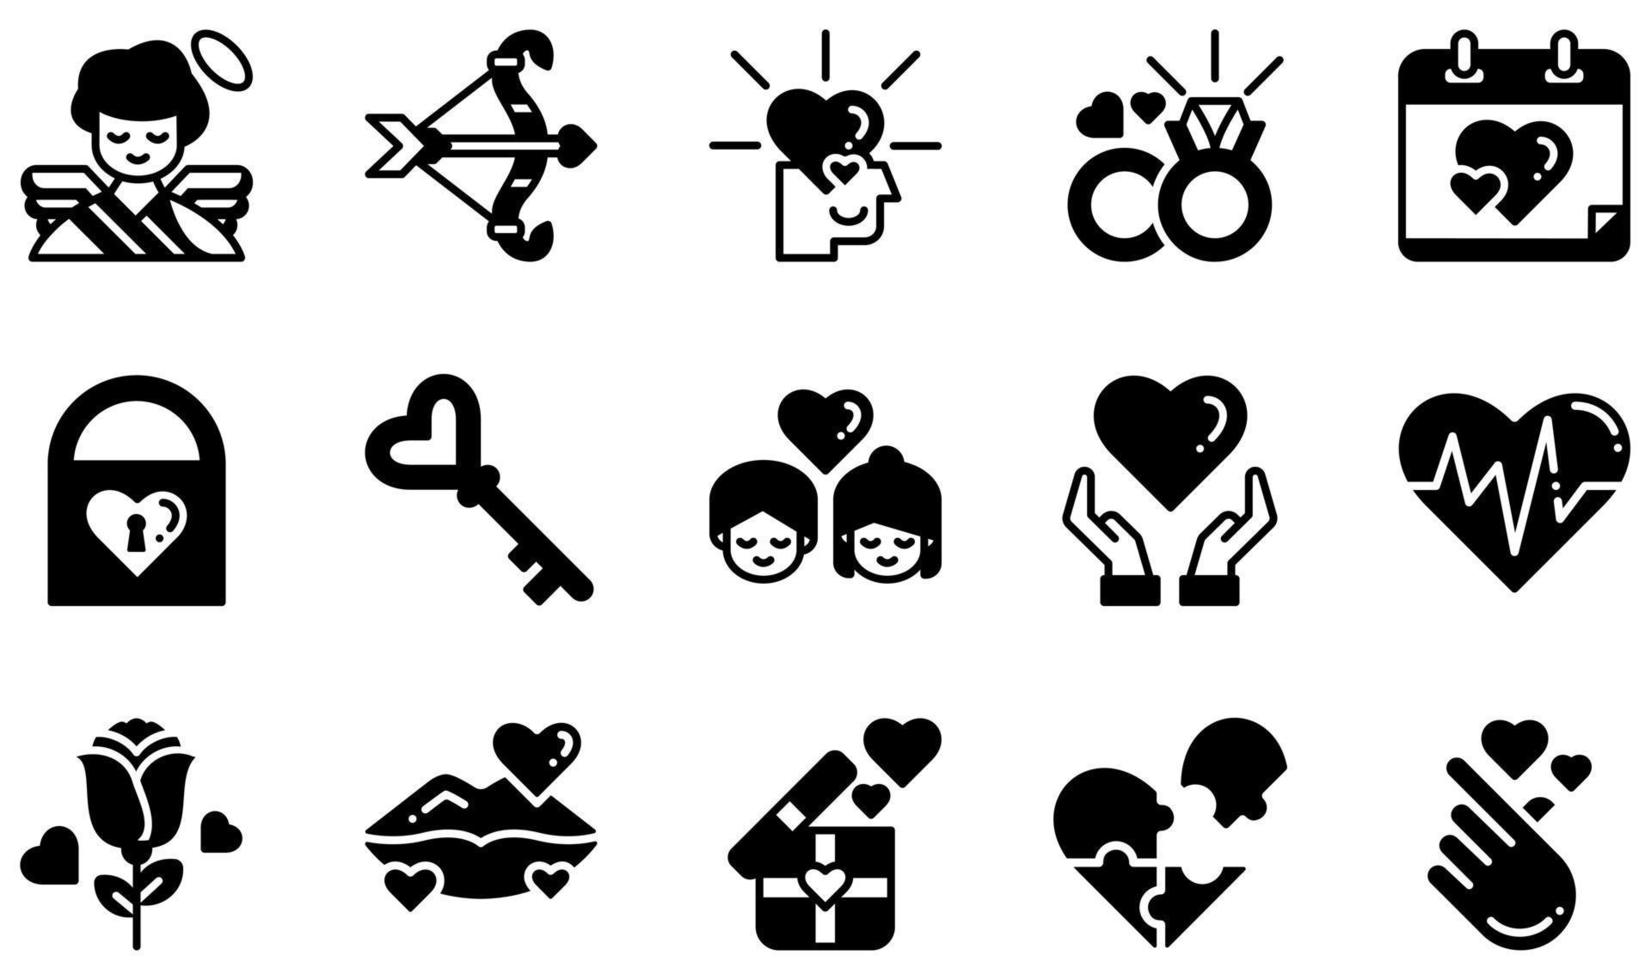 Set of Vector Icons Related to Love. Contains such Icons as Cupid, In Love, Wedding Ring, Padlock, Love, Rose and more.